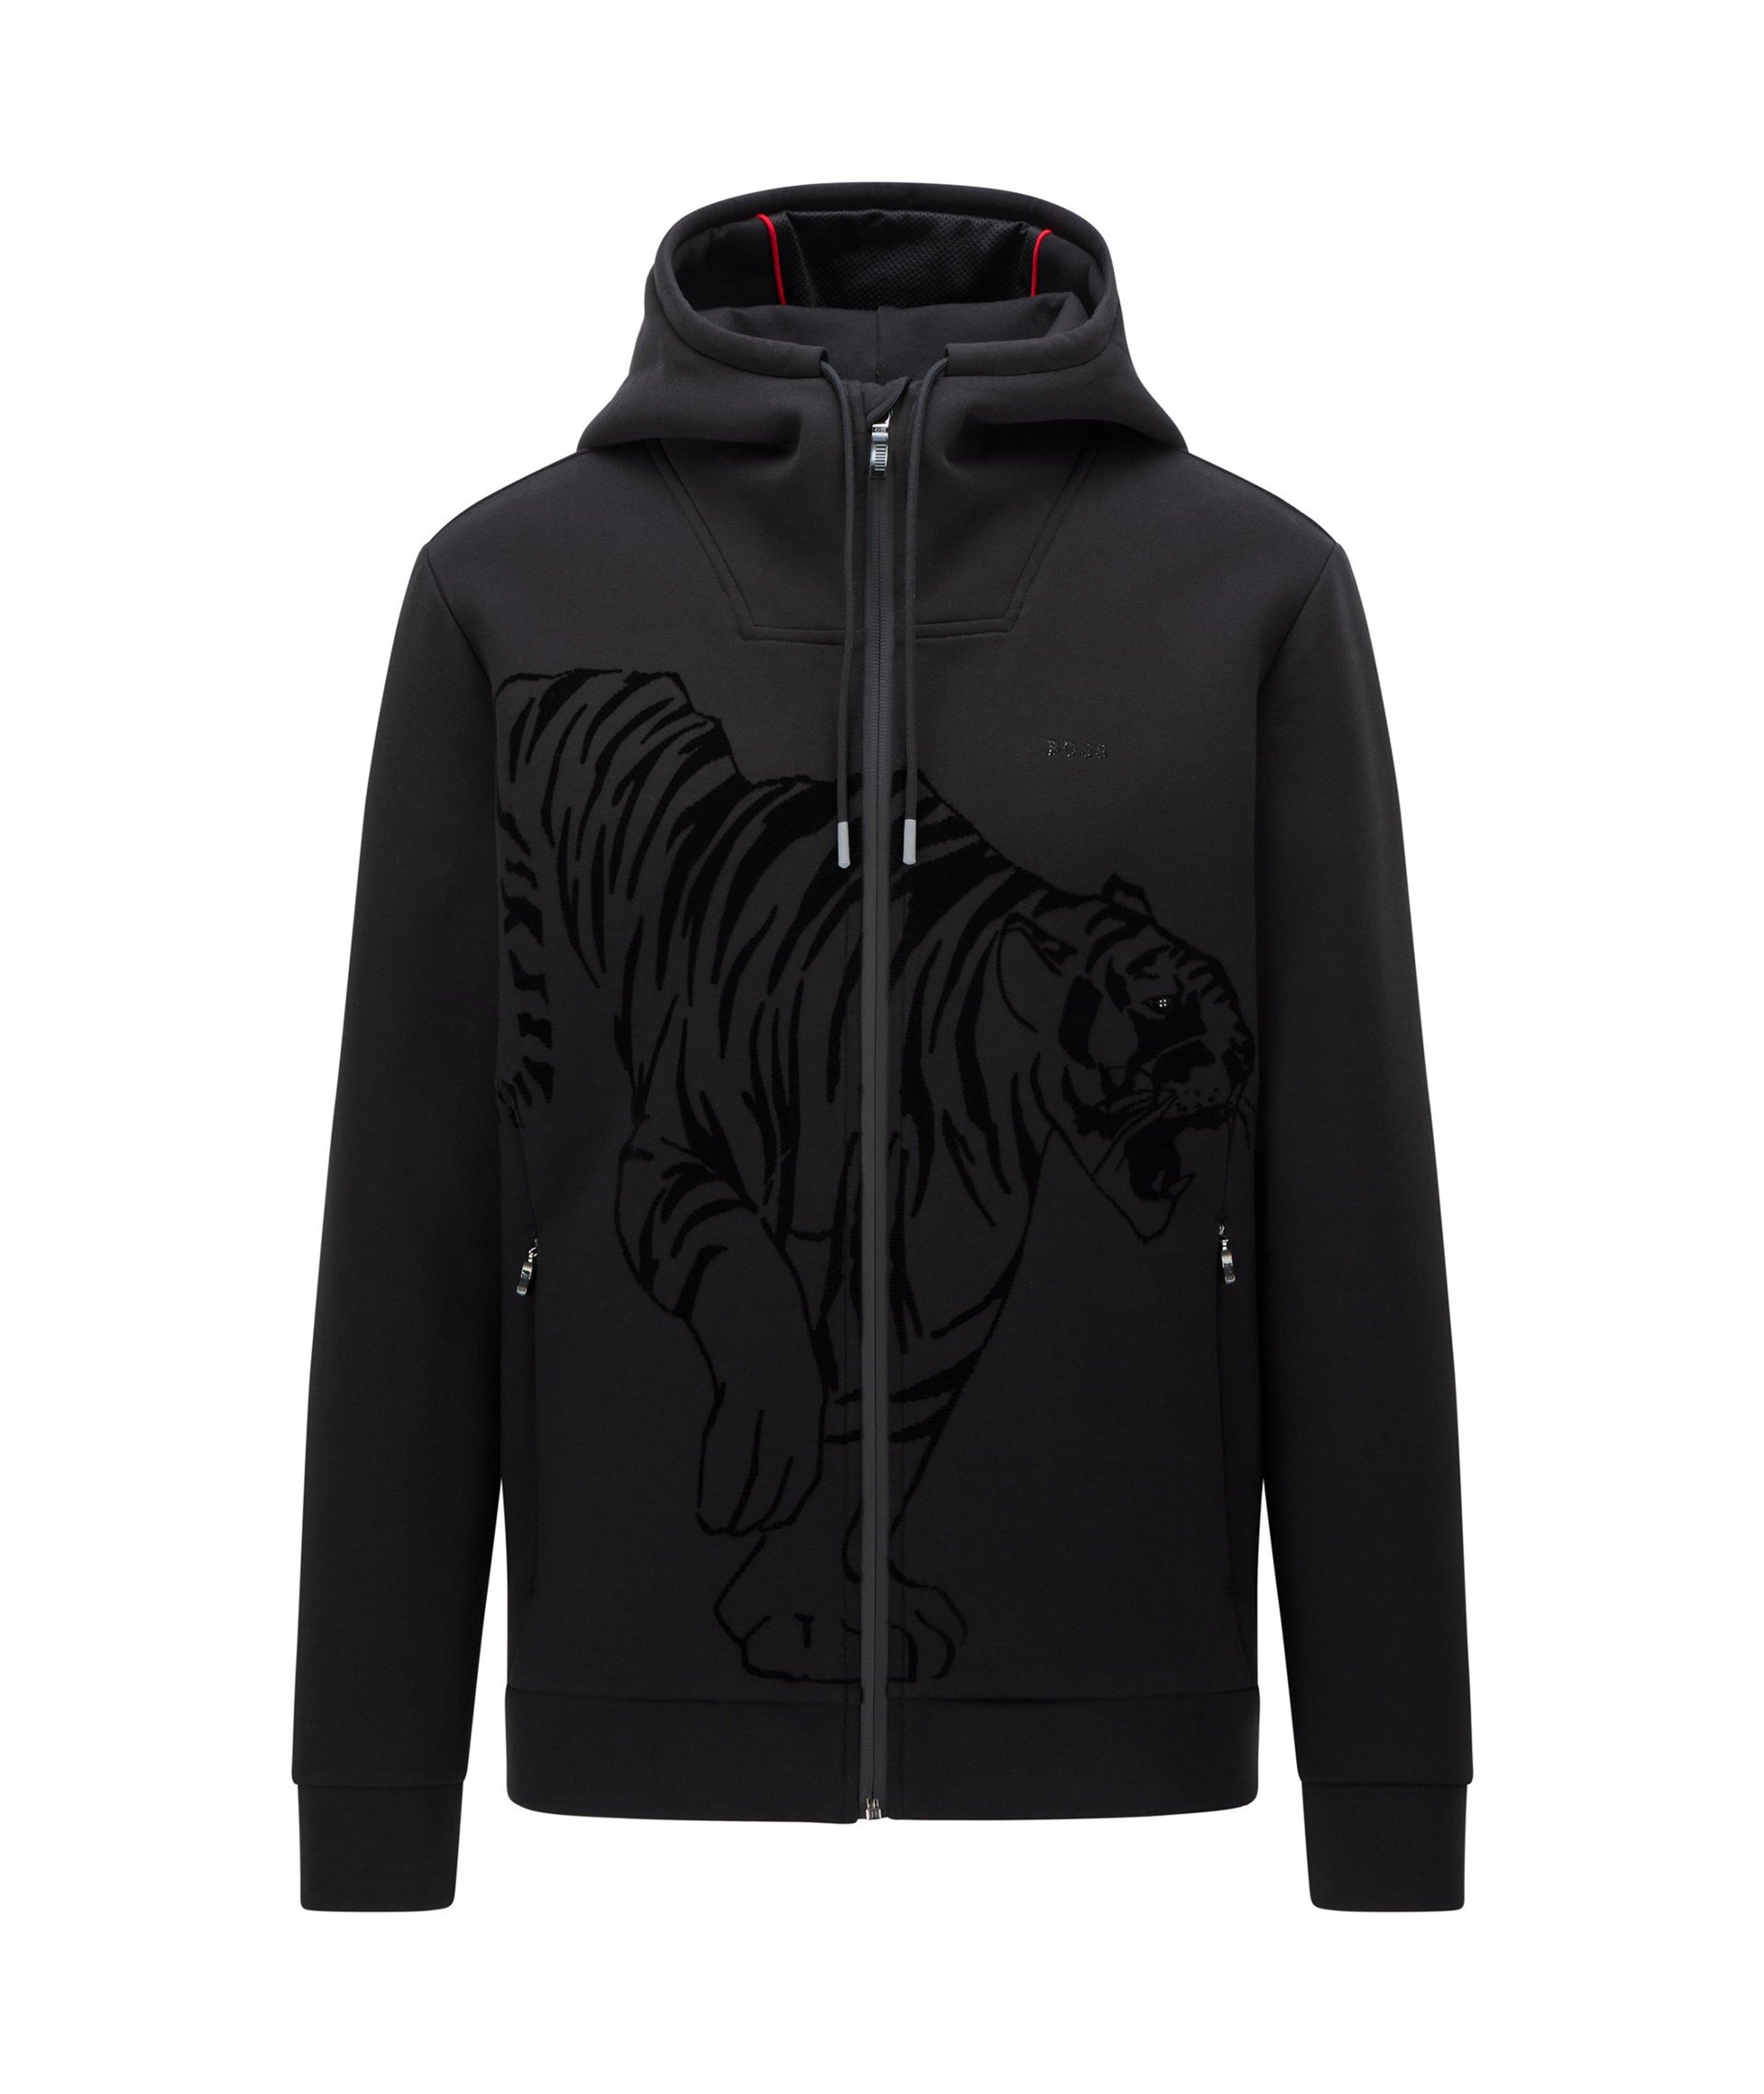 Year of the Tiger Zip-Up Hooded Cotton-Blend Sweatshirt image 0